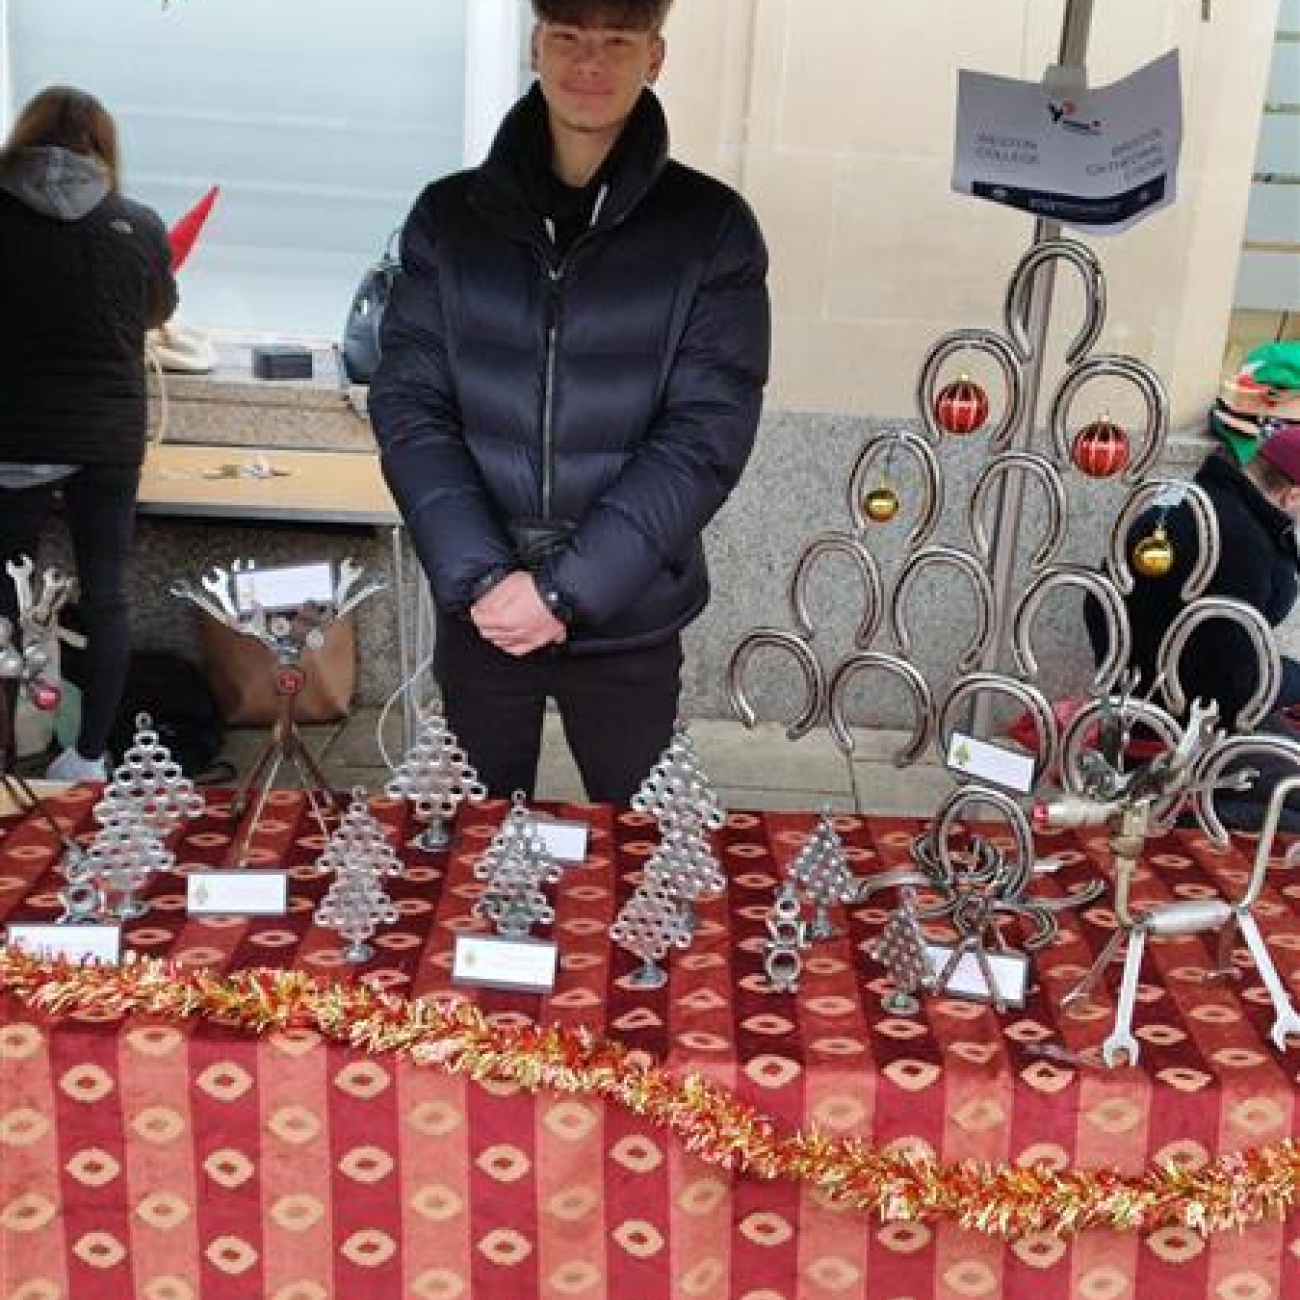 Jack at the Young Enterprise Christmas Market